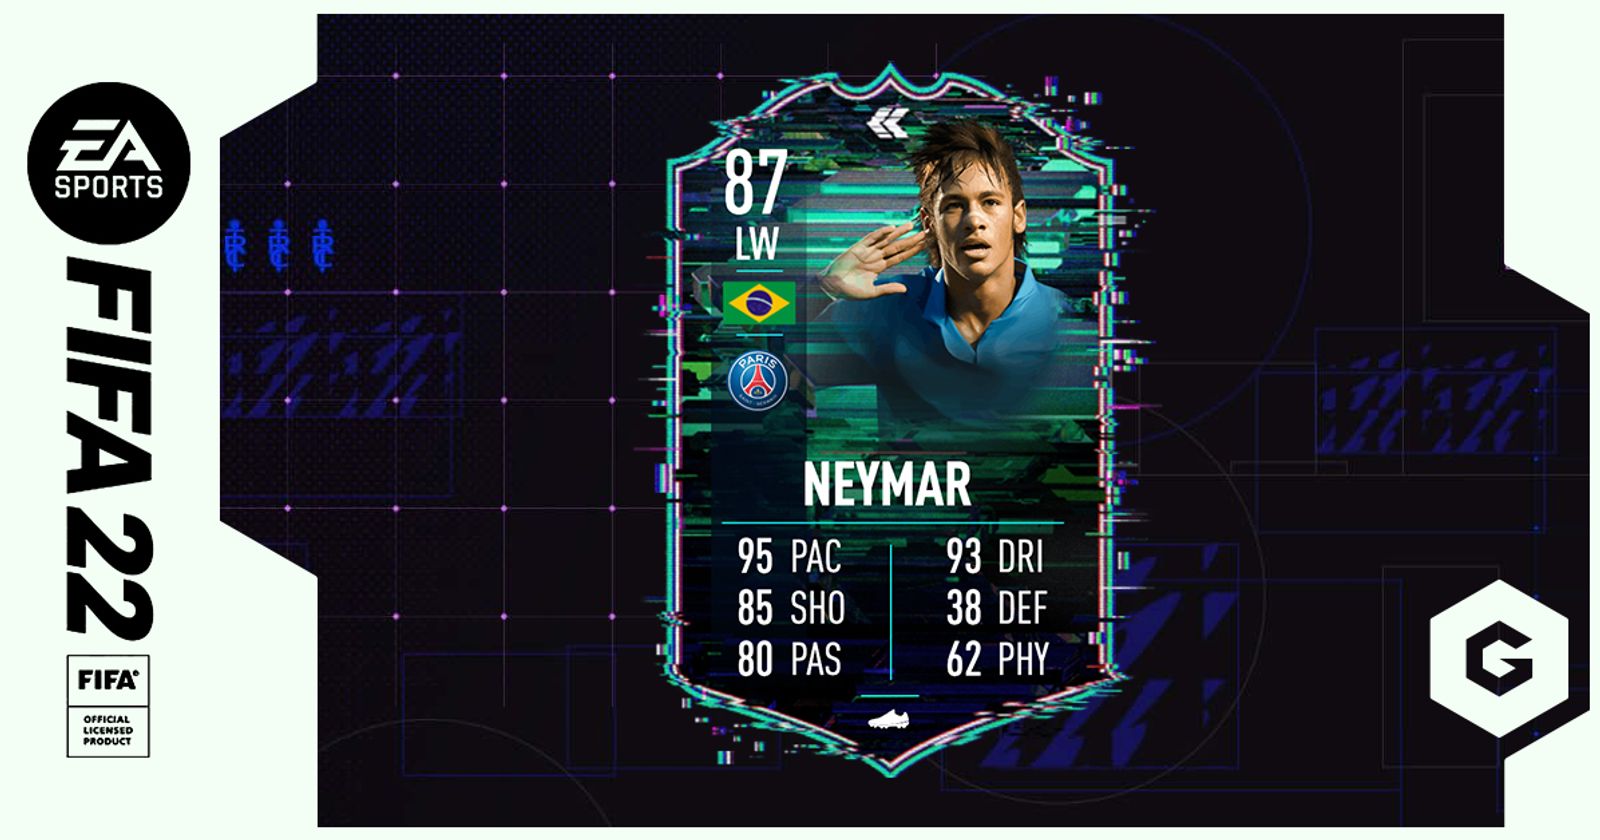 Small Round Thing ⚽️ on X: So, I just started on the fifa 22 companion  app, completed a couple of sbc challenges and here we have it packed  Neymar let's go #fifa22 #